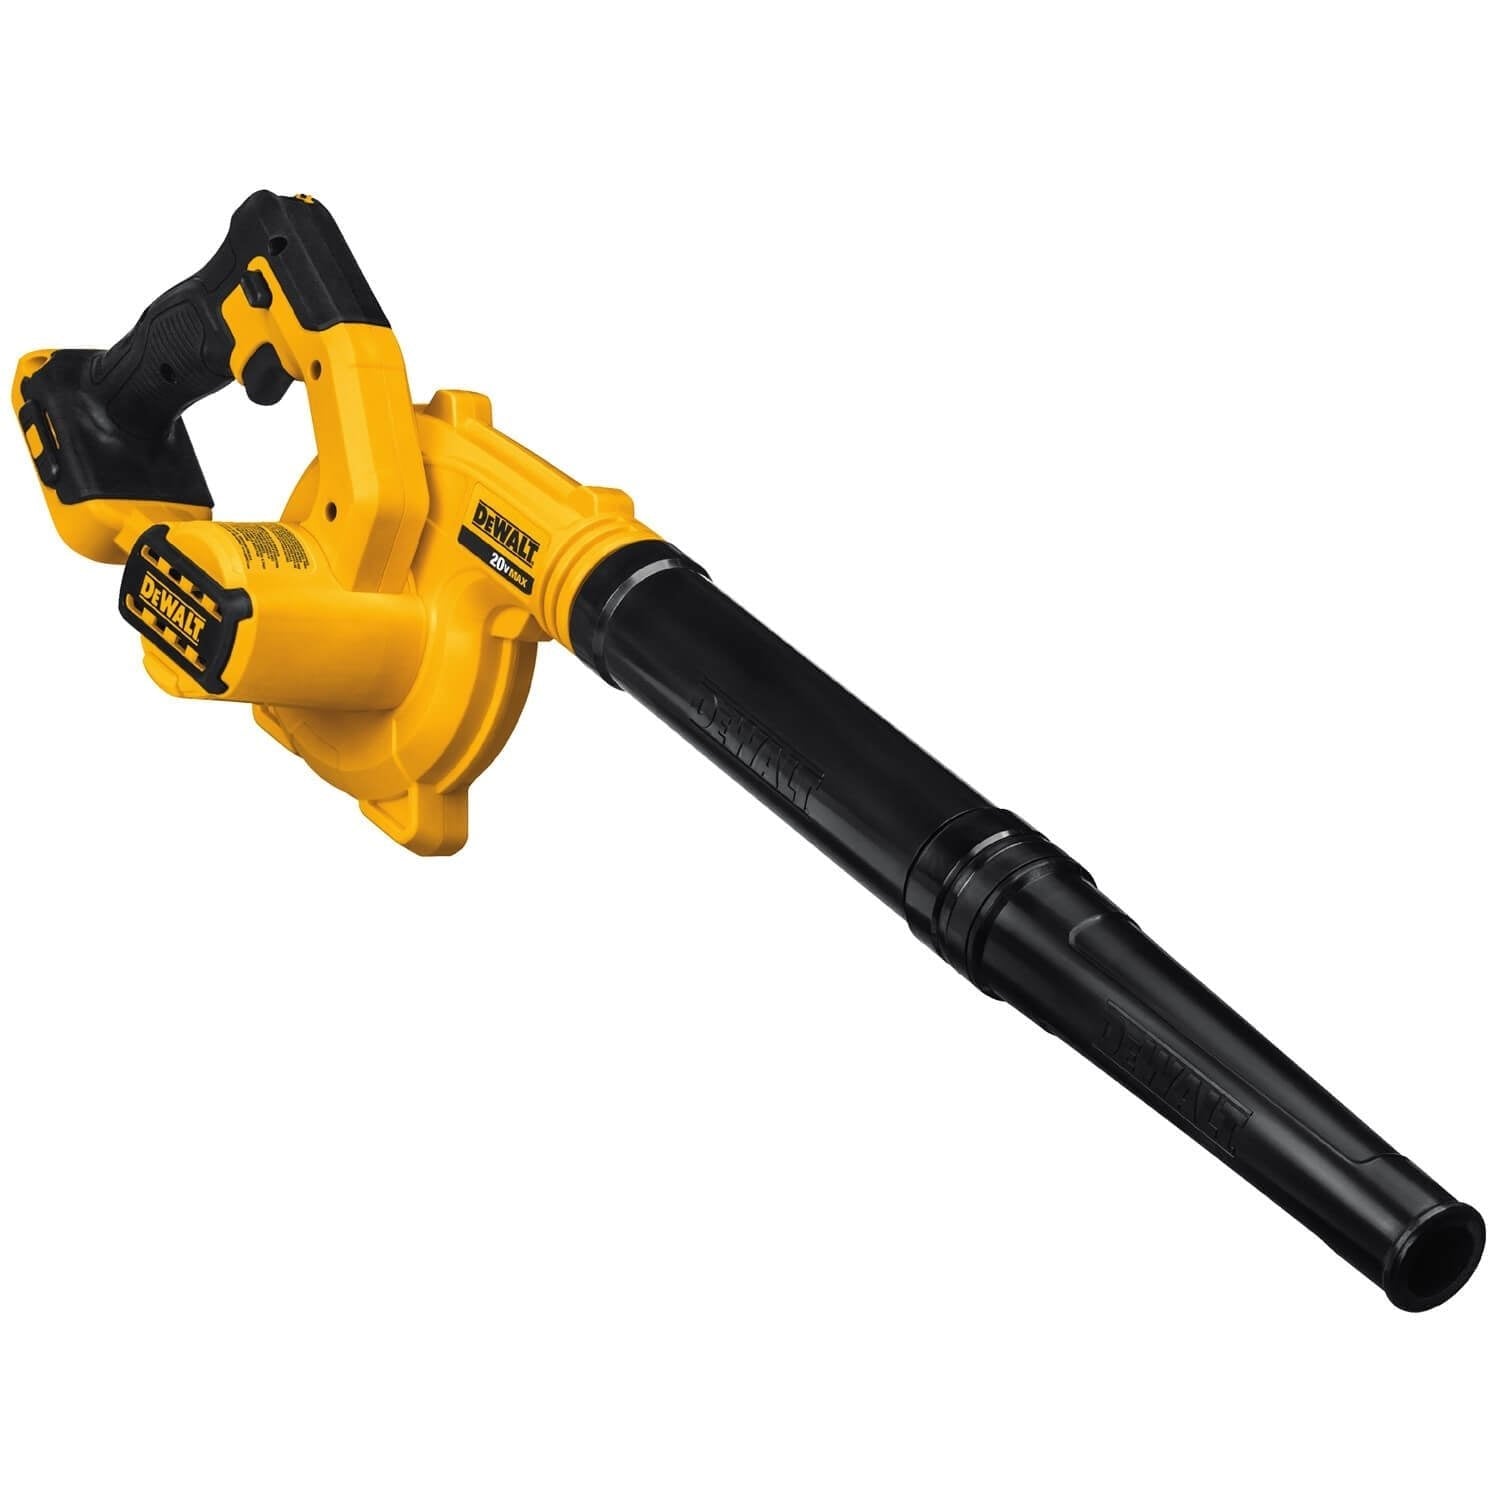 DEWALT DCE100B 20V MAX COMPACT JOBSITE BLOWER (Tool Only) - wise-line-tools